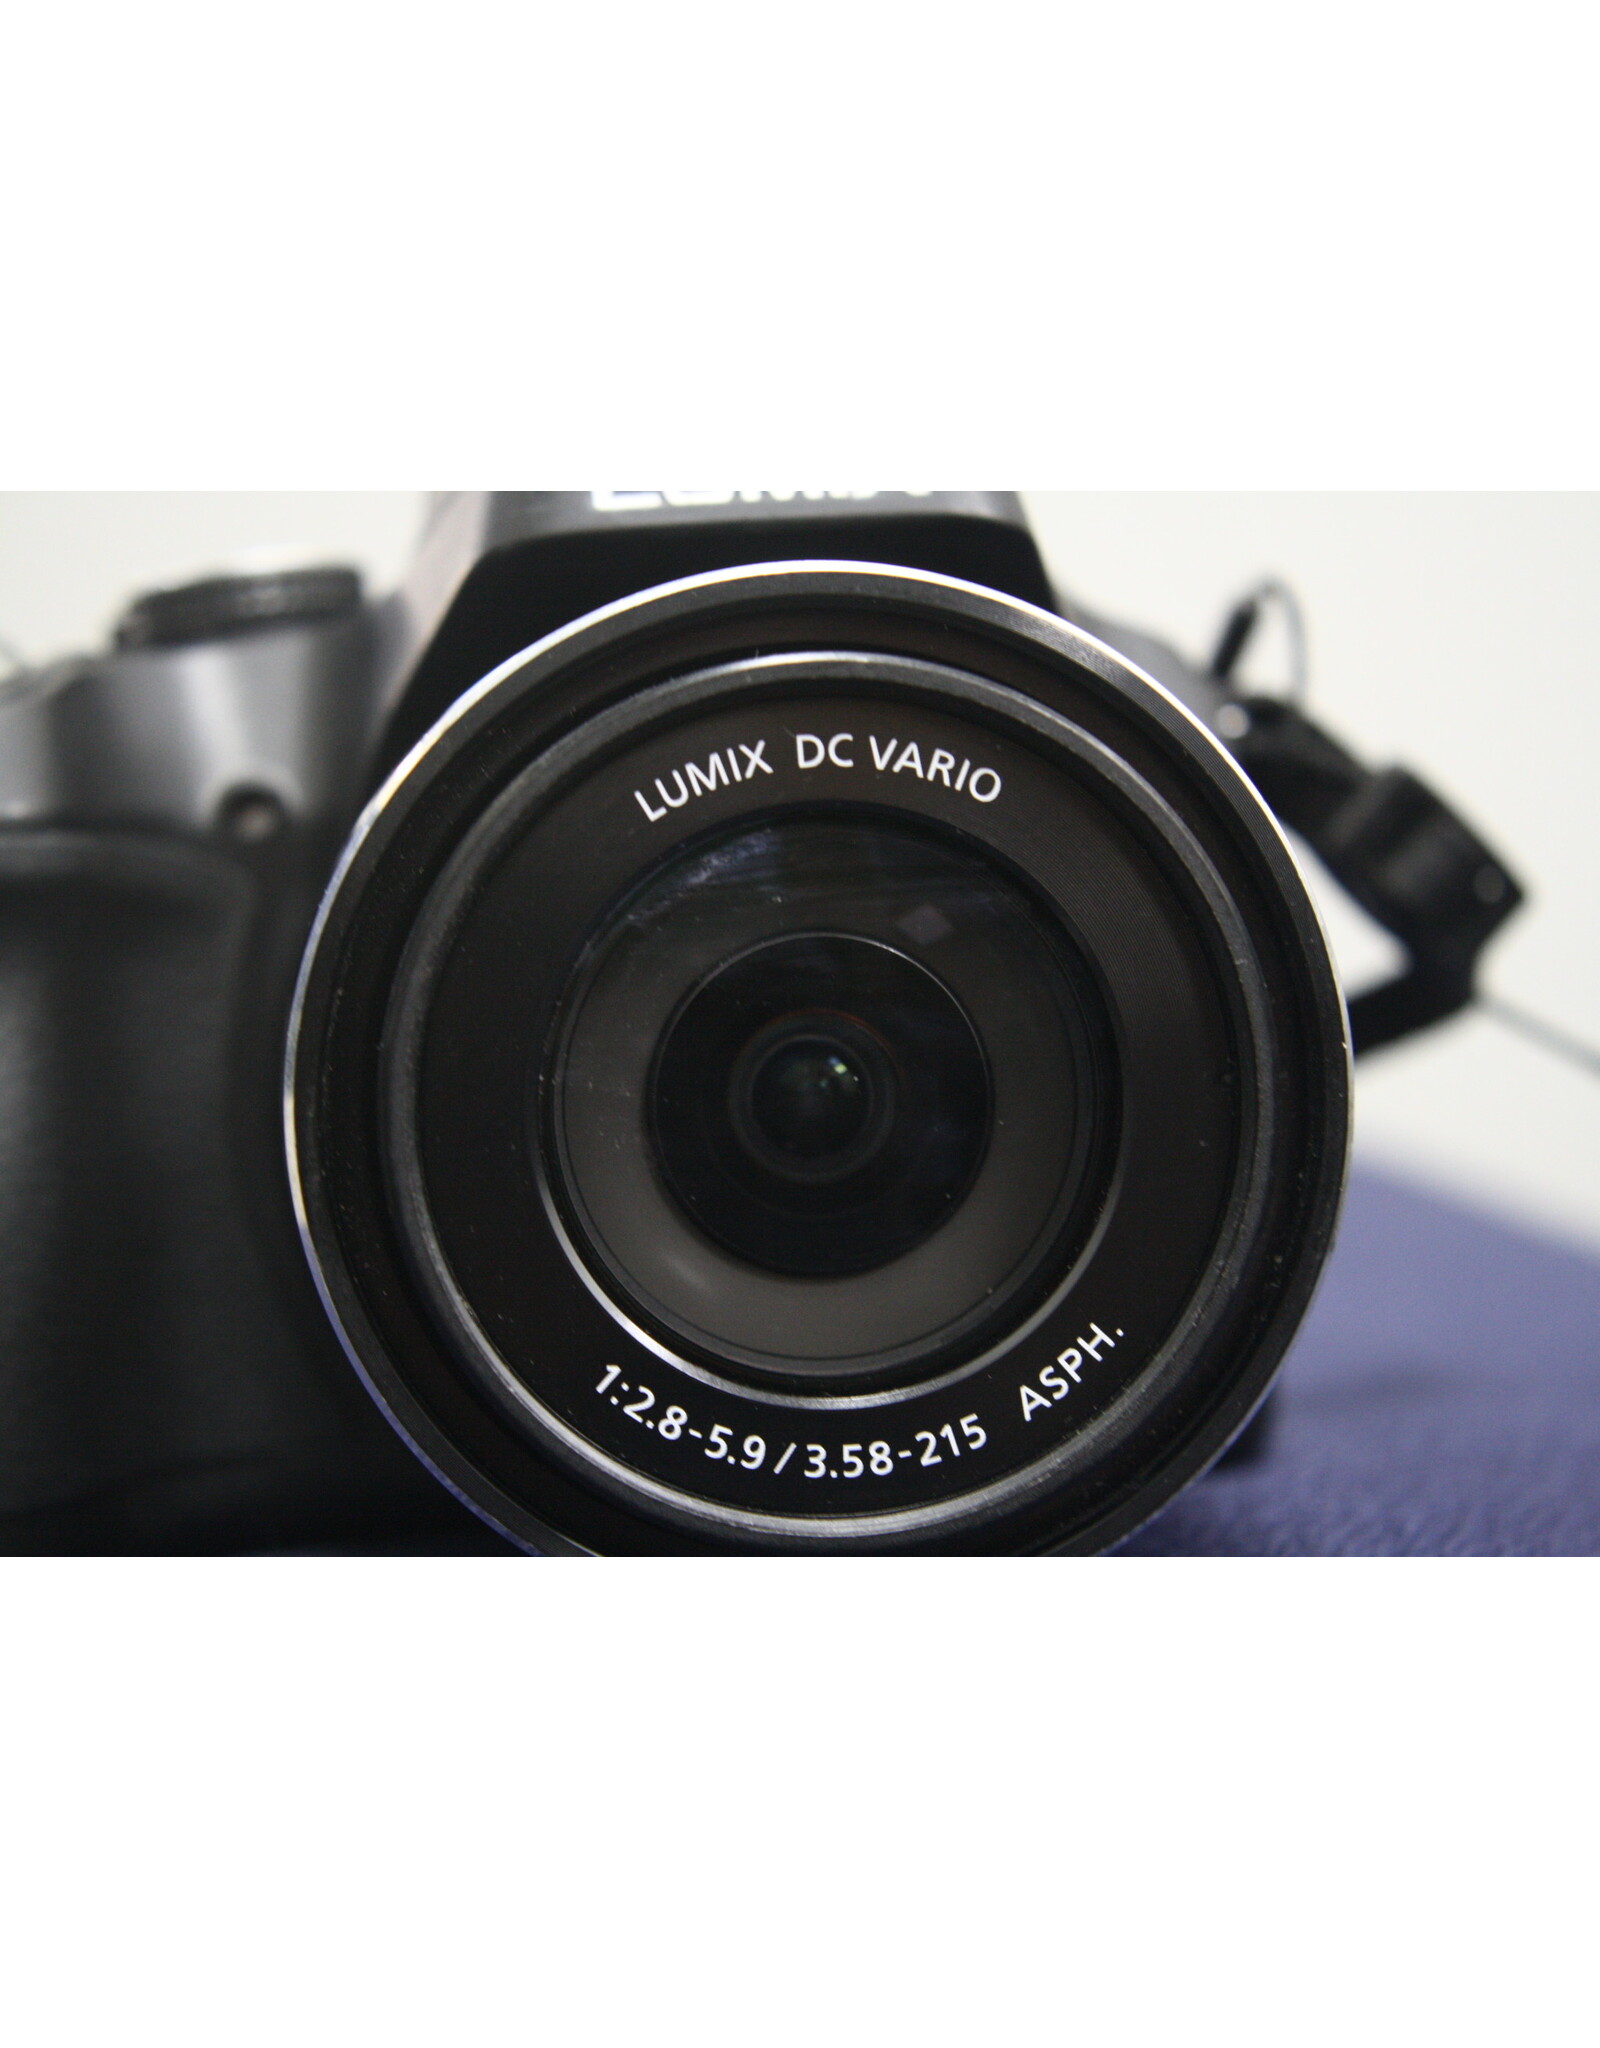 Panasonic Panasonic LUMIX DMC-FZ70 16.1 MP Digital Camera with 60x Optical Image Stabilized Zoom and 3-Inch LCD (Black)w/ Case, 2-batteries and charger (Pre-Owned)